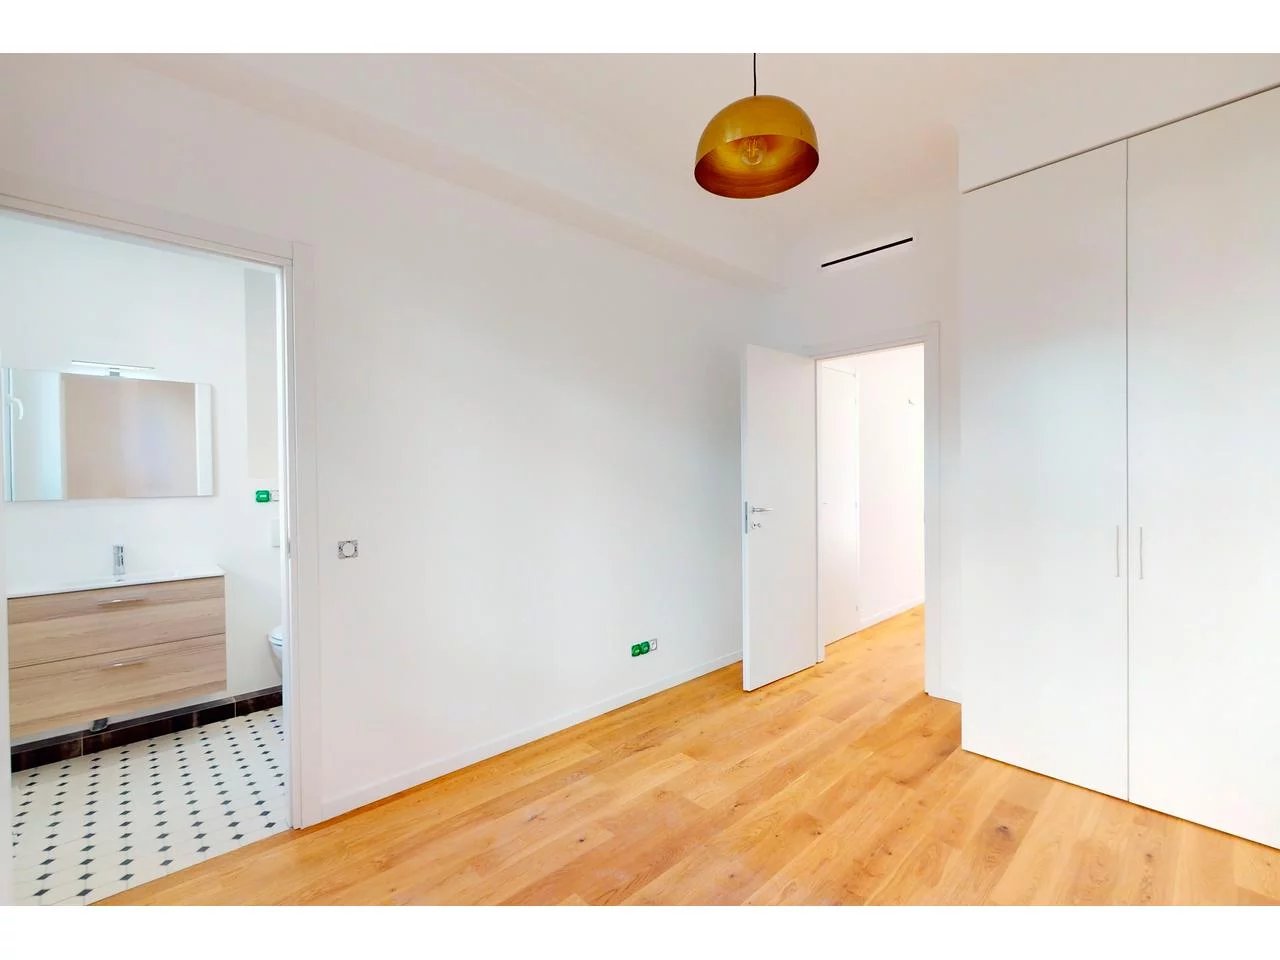 Appartement  3 Rooms 78.59m2  for sale   595 000 €